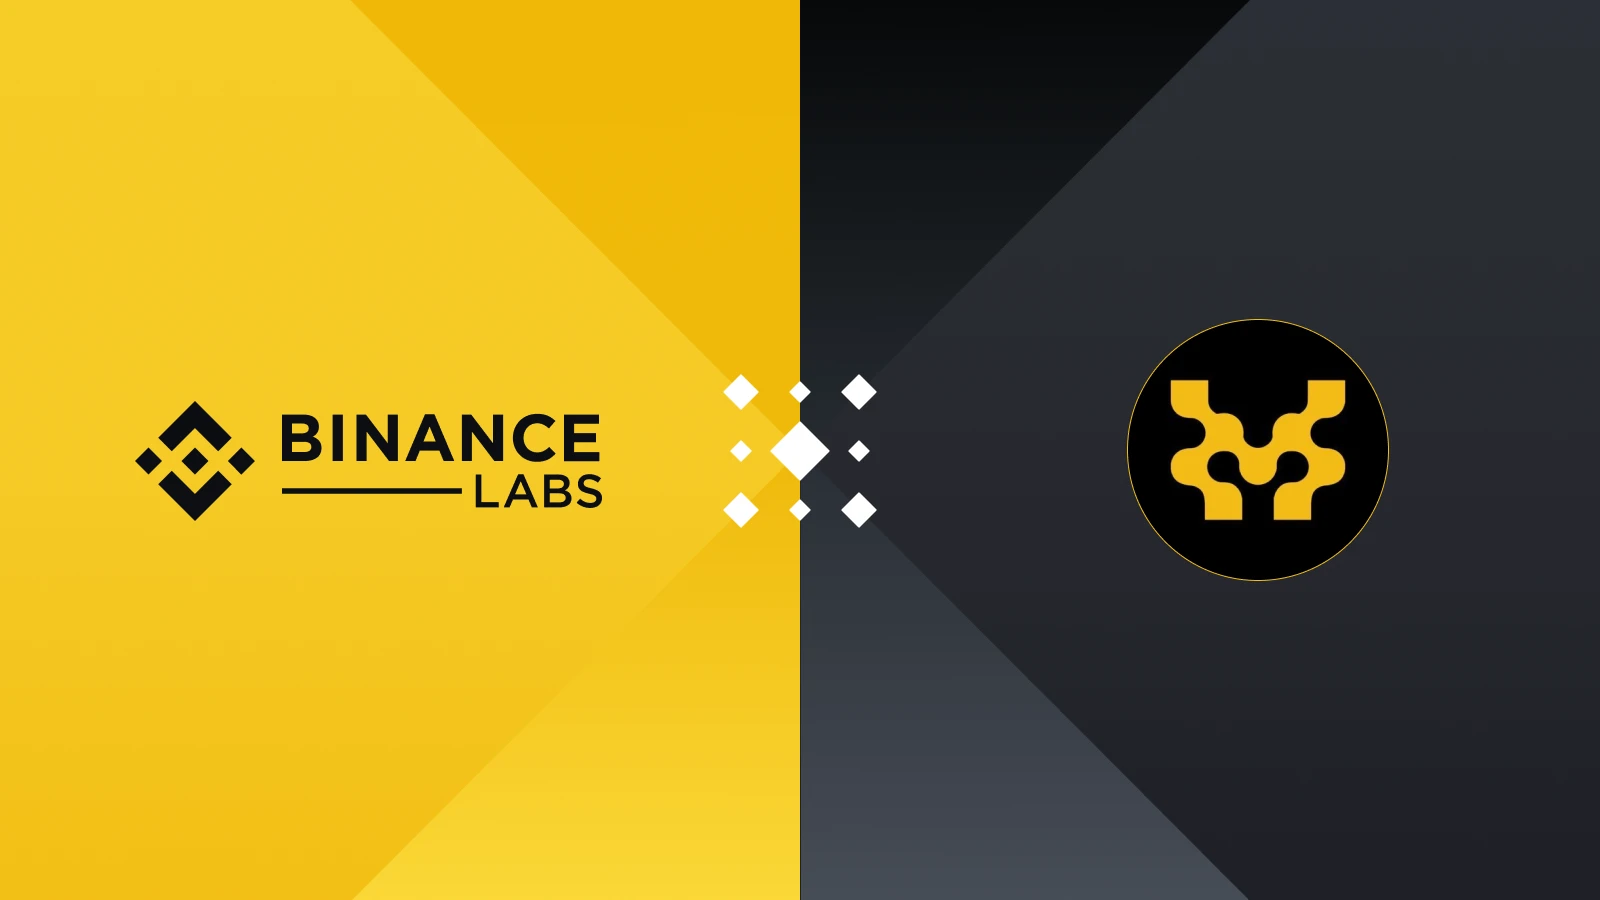 Binance Labs invested in early-stage potential projects that you must participate in this week: Movement and Initia